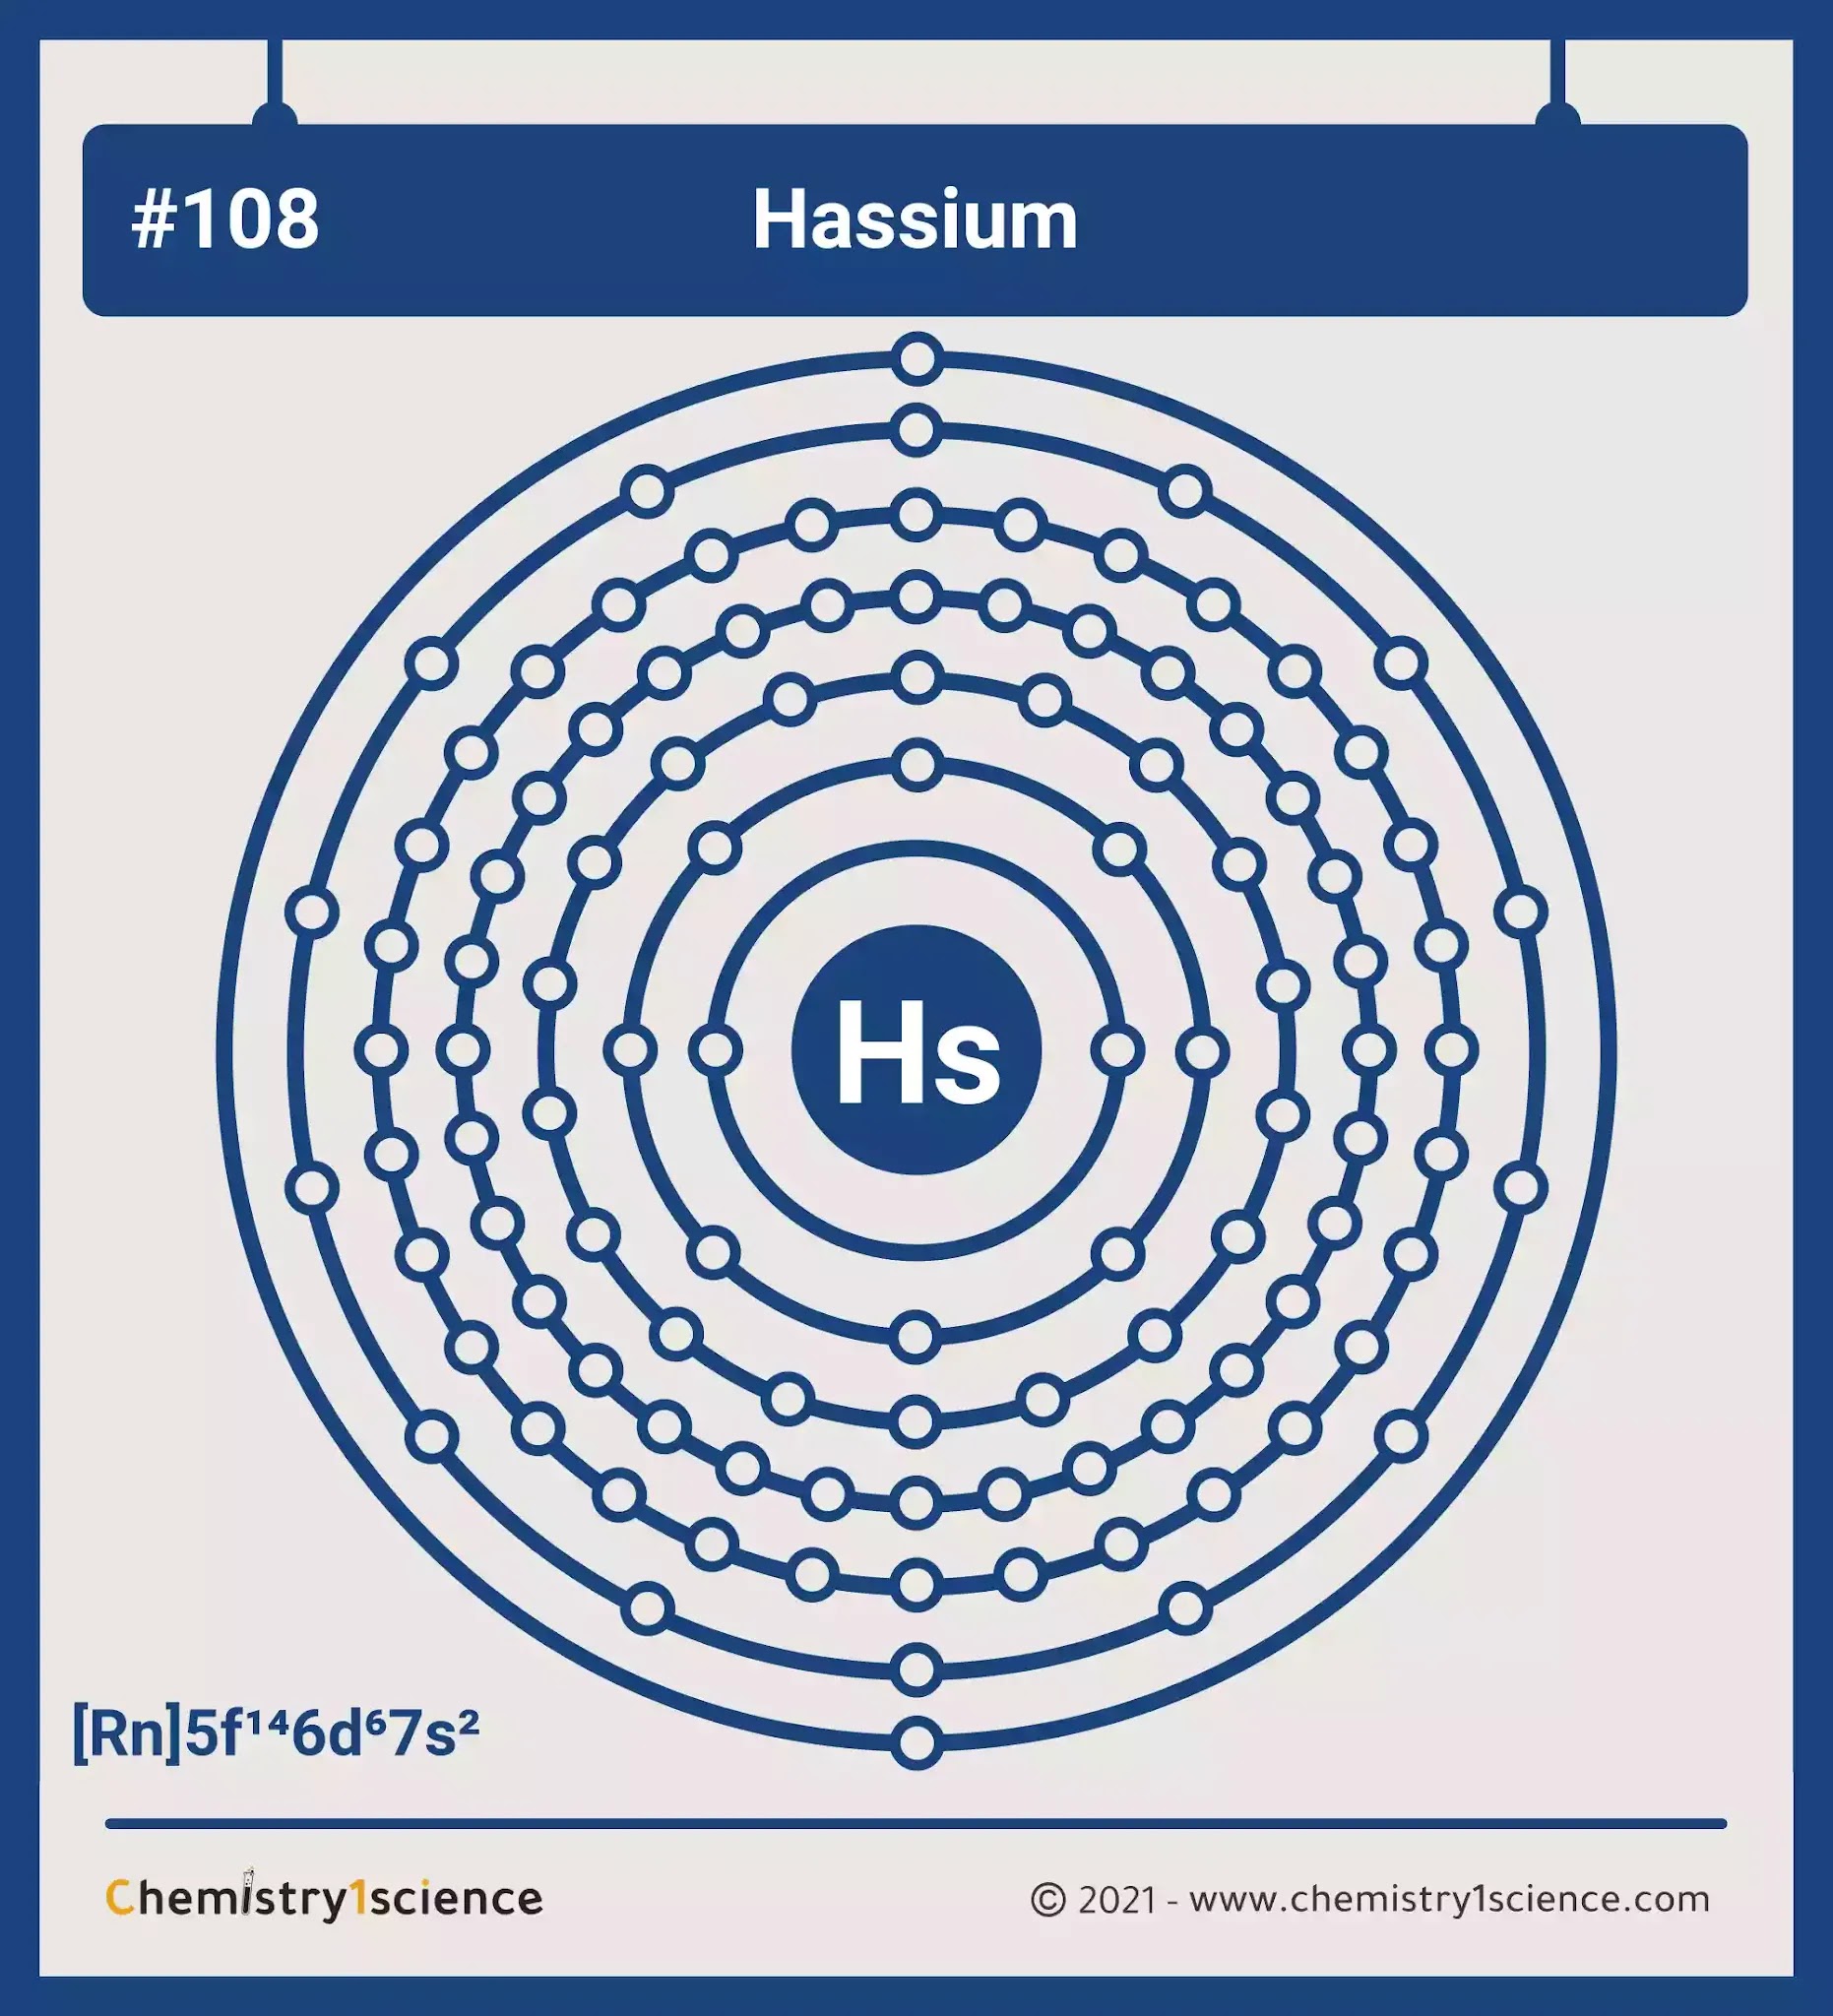 Hassium: Electron configuration - Symbol - Atomic Number - Atomic Mass - Oxidation States - Standard State - Group Block - Year Discovered – infographic